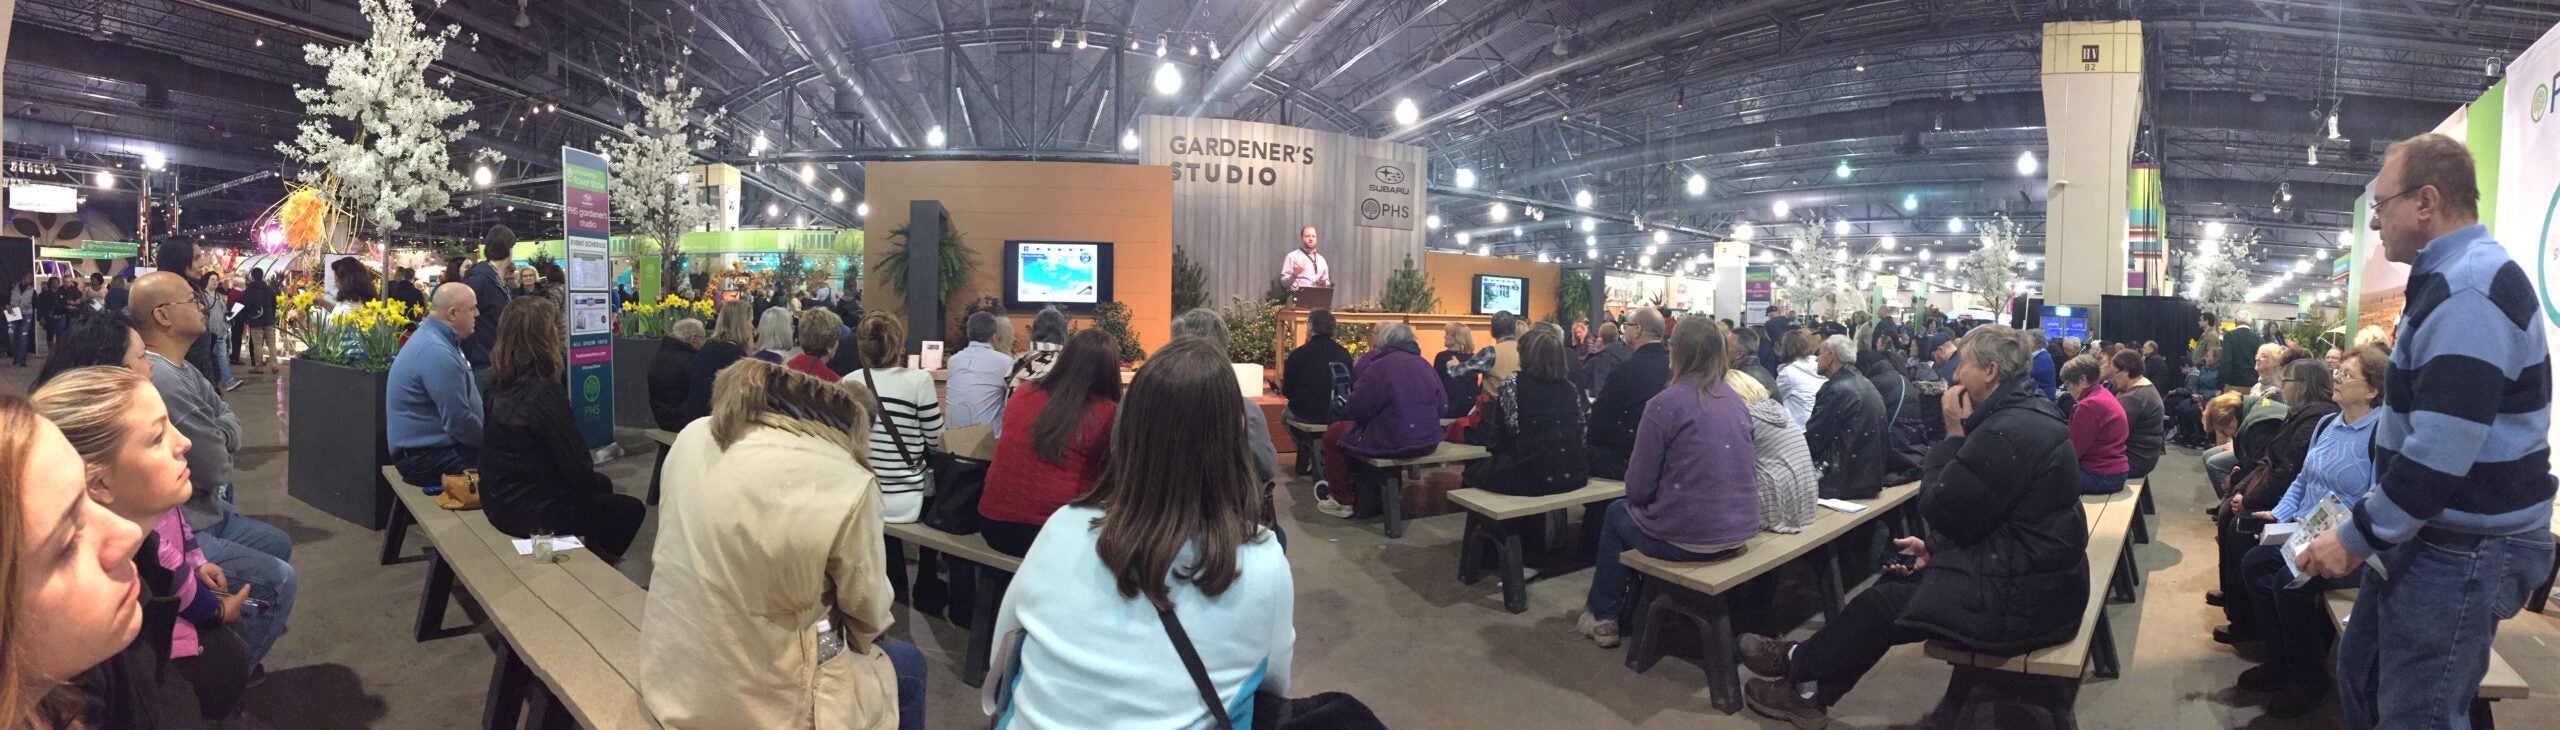 Belgard's Joe Raboine gives a seminar on using 3-D design technology to plan landscape and outdoor living projects.